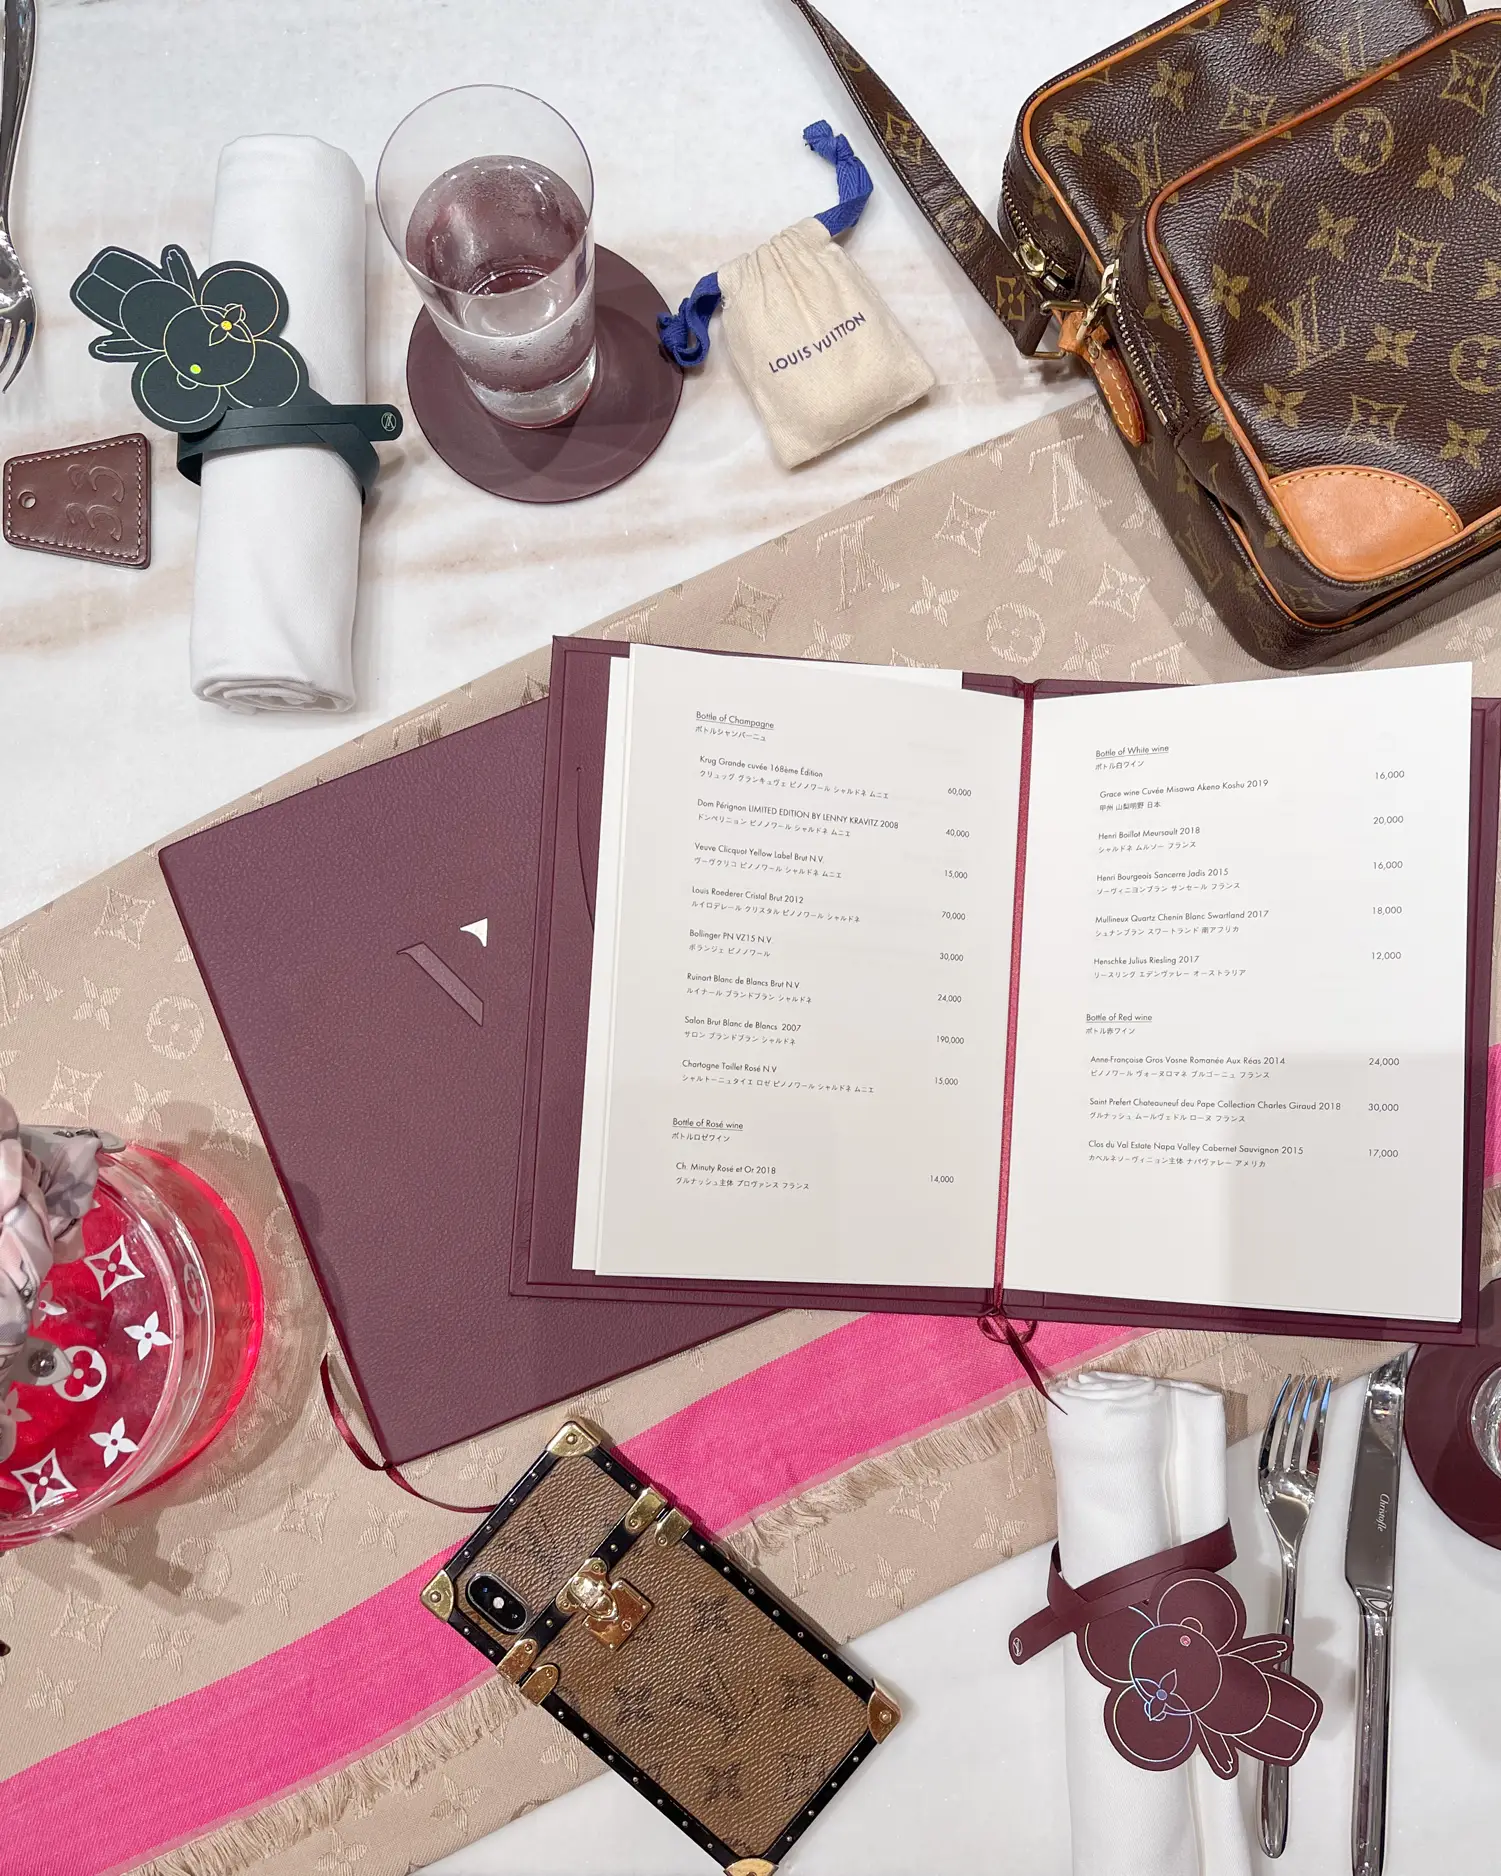 Louis Vuitton Cafe LE CAFE V, Gallery posted by Chihiro